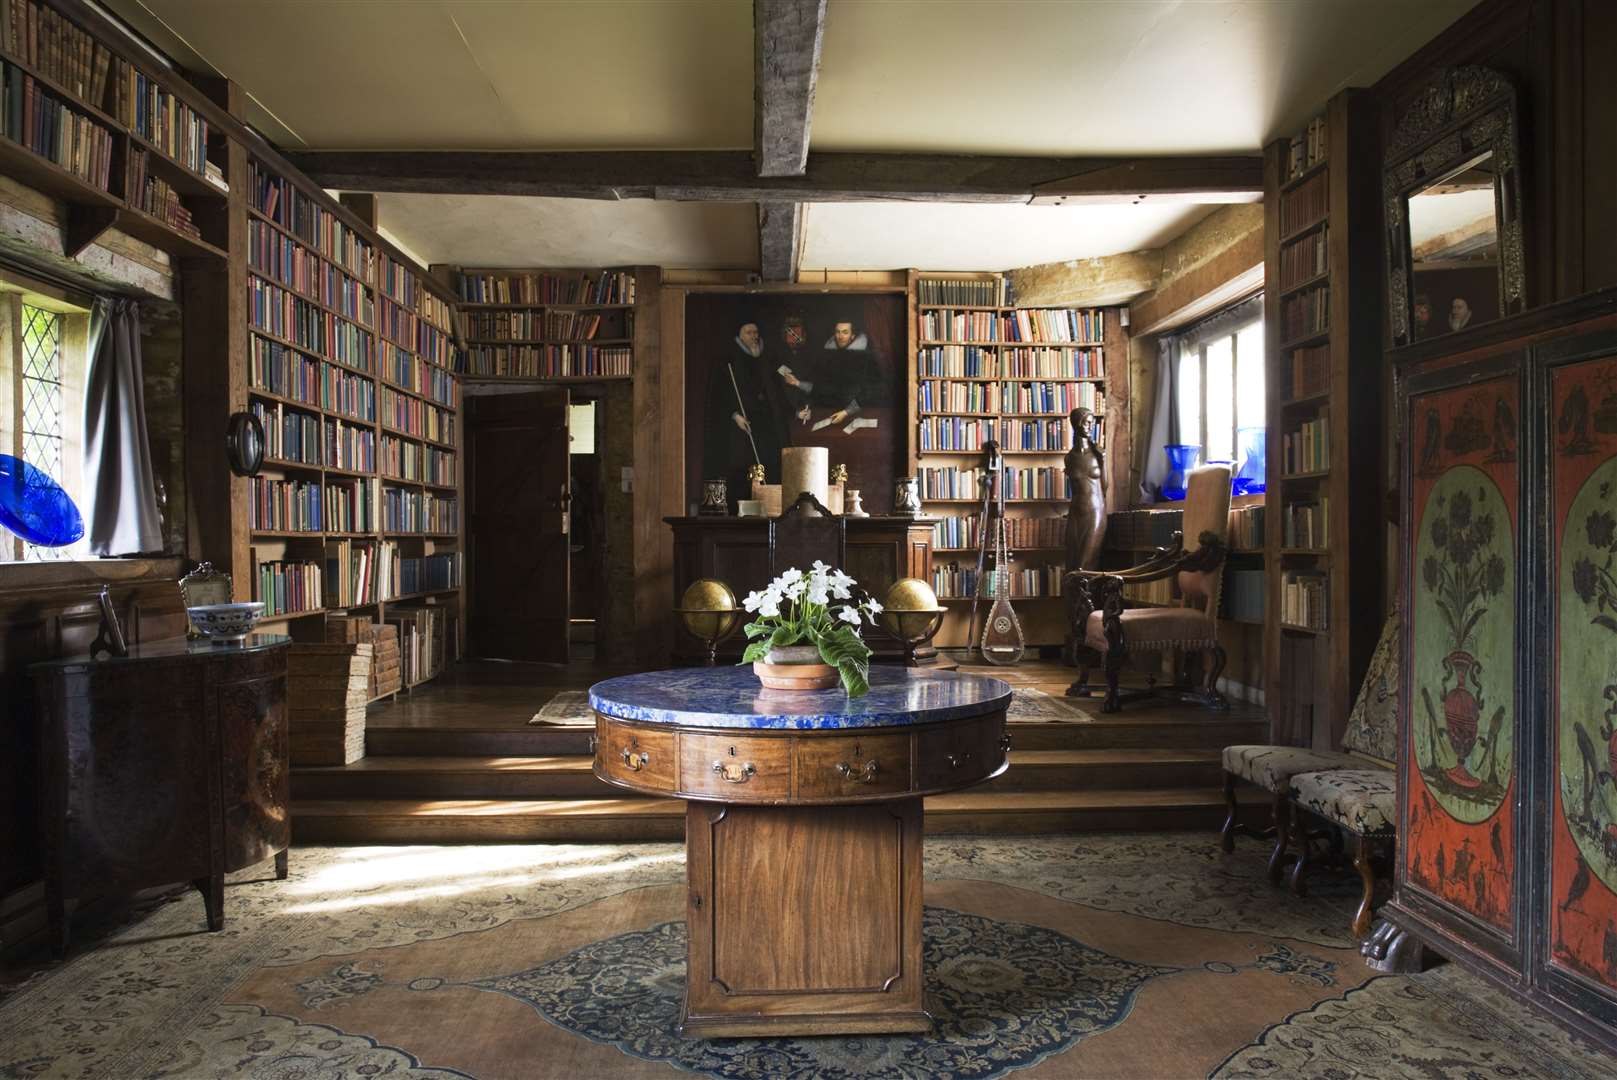 Visitors will be allowed back in the Long LIbrary Picture: John Hammond/National Trust